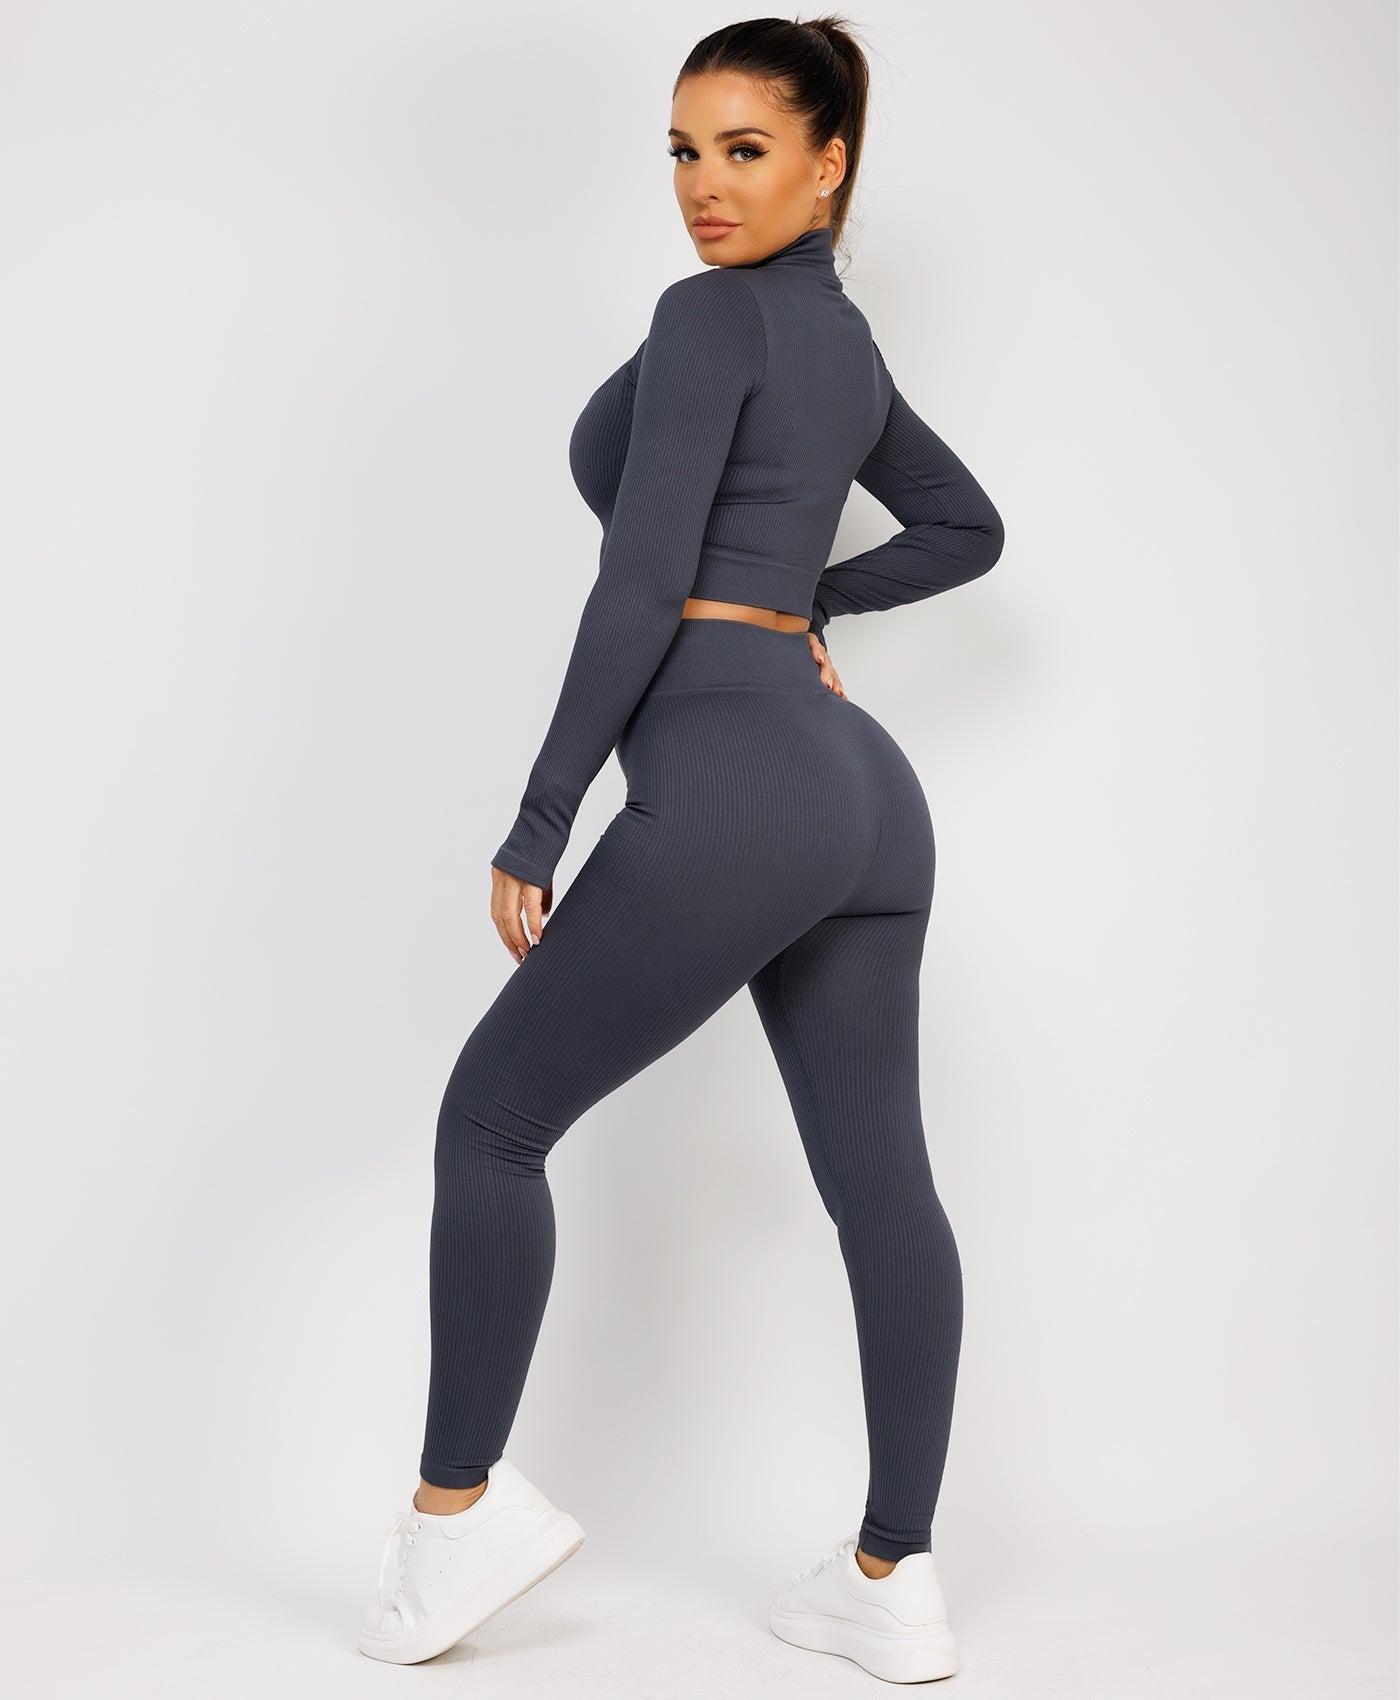 Charcoal-Grey-Zipped-Neck-Ribbed-Activewear-11